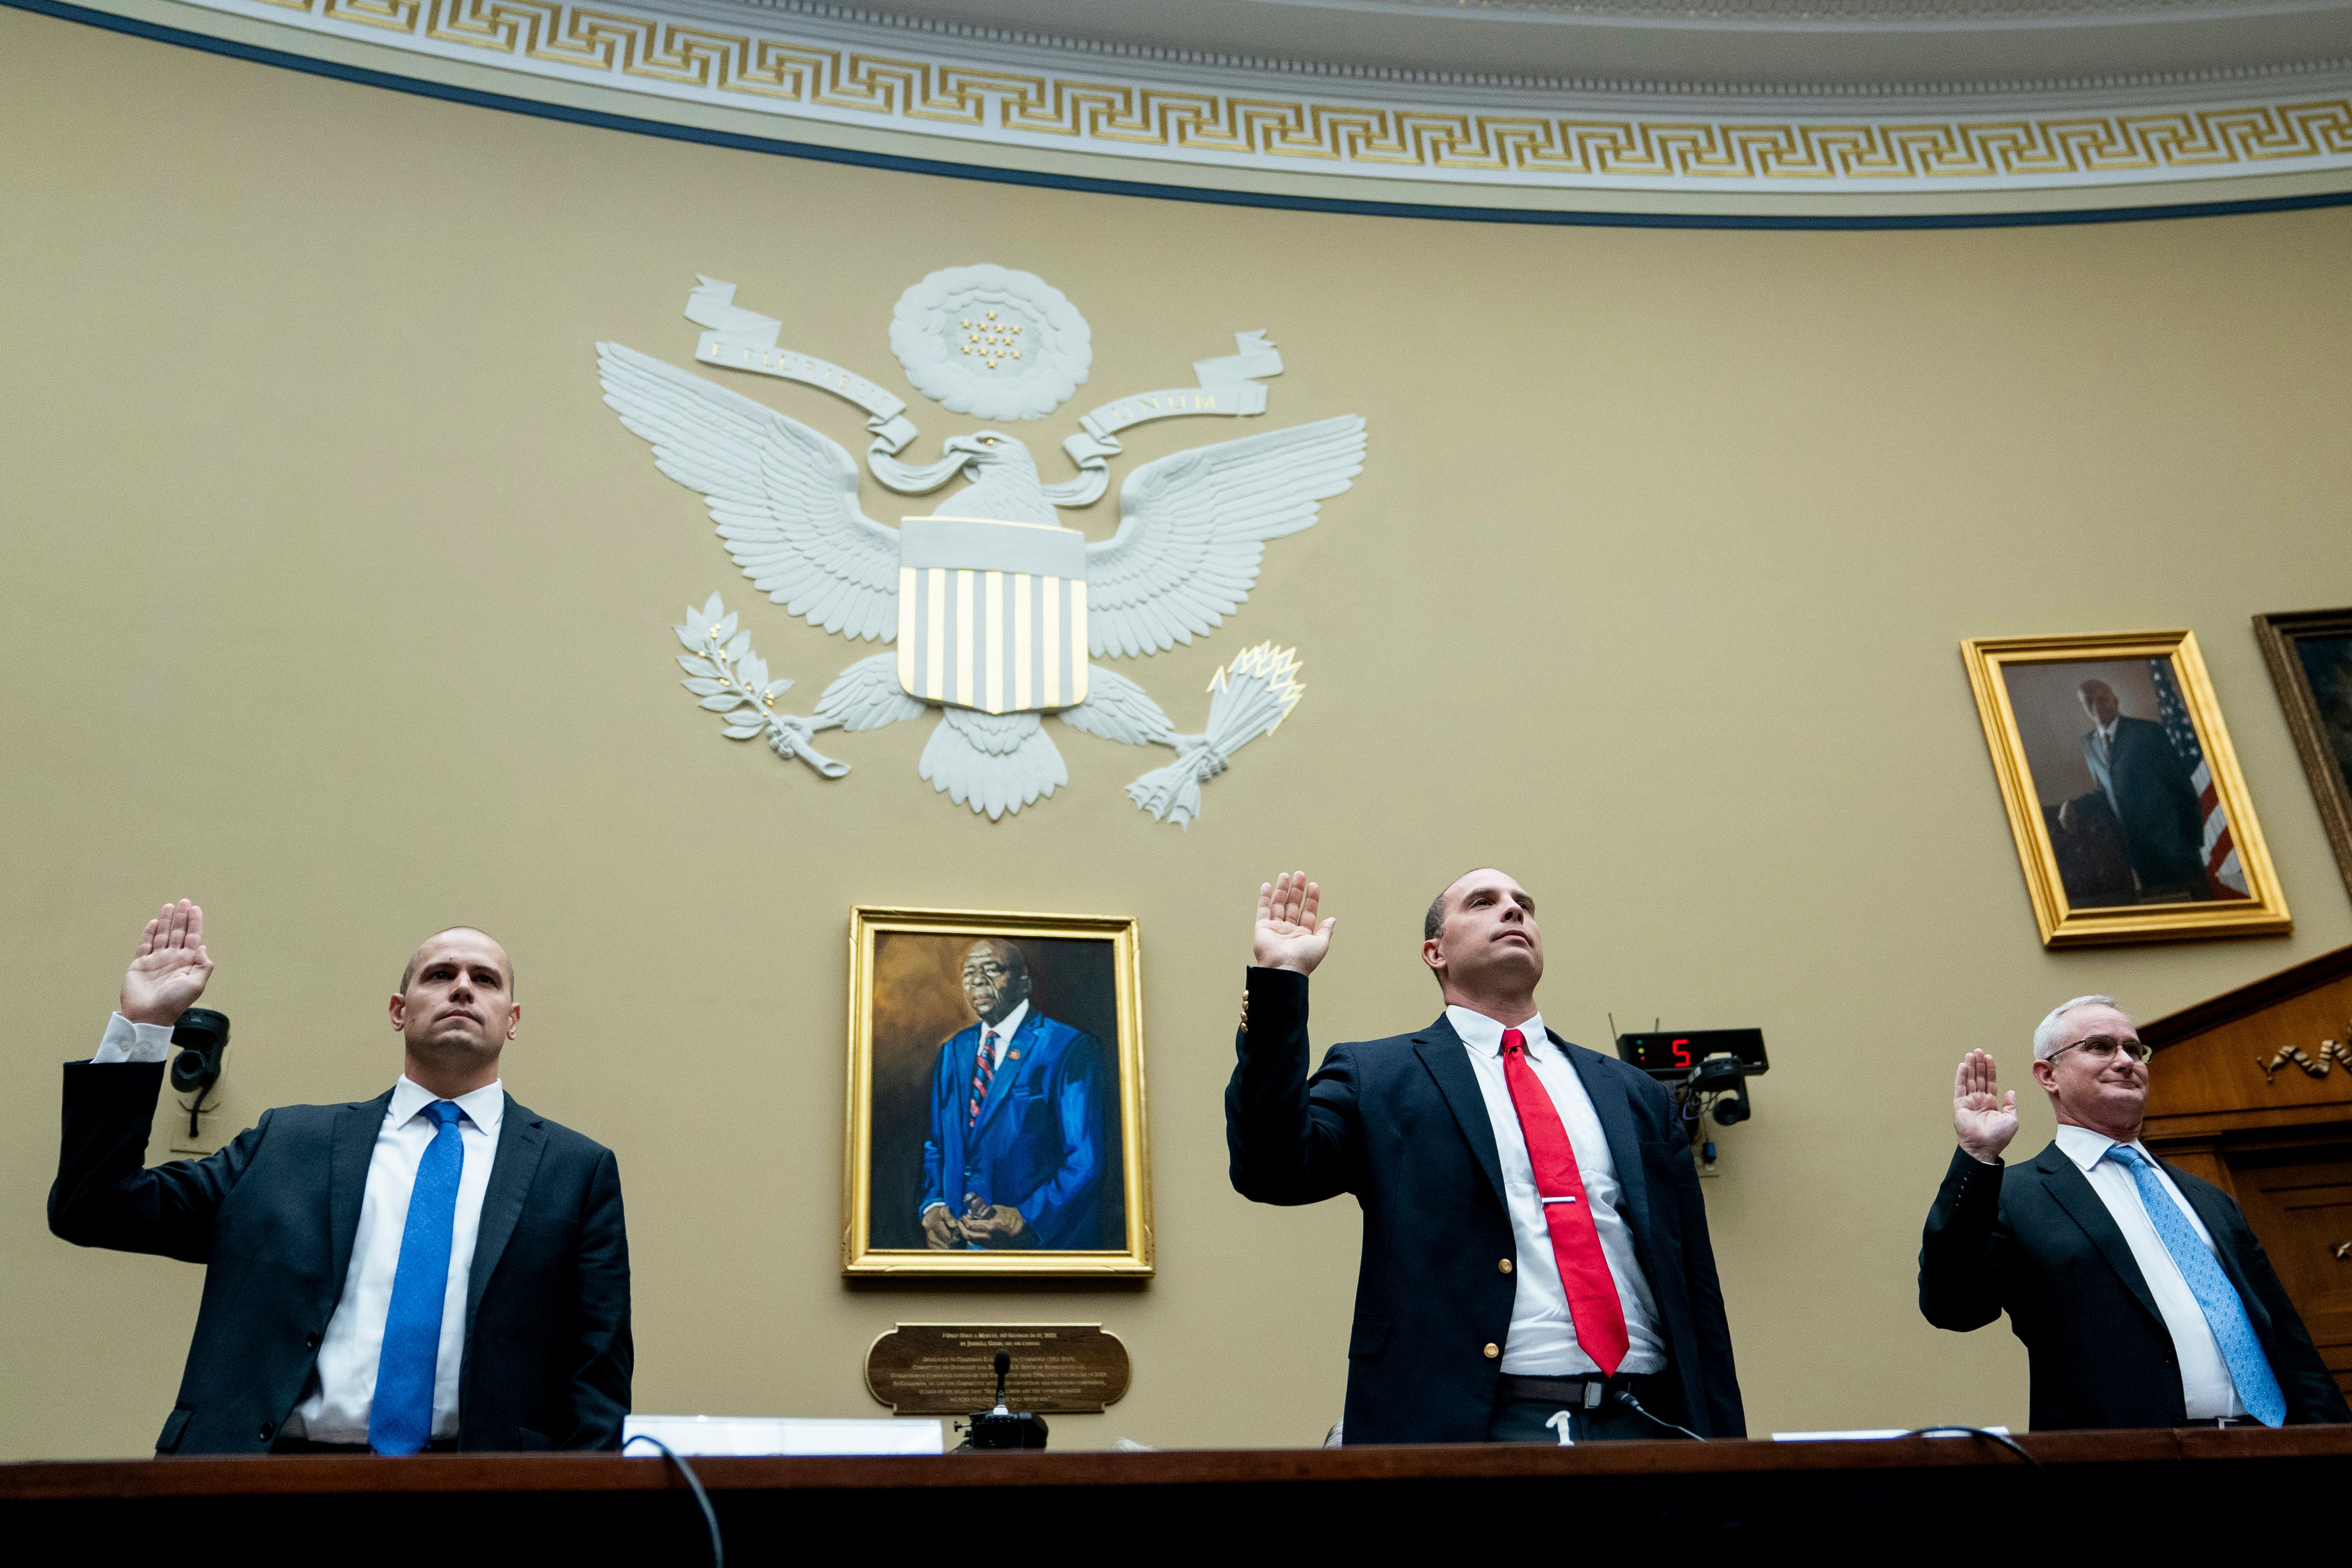 Ryan Graves, Americans for Safe Aerospace Executive Director, from left, U.S. Air Force (Ret.) Maj. David Grusch, and U.S. Navy (Ret.) Cmdr. David Fravor, are sworn in during a House Oversight and Accountability subcommittee hearing on UFOs, Wednesday, July 26, 2023, on Capitol Hill in Washington.